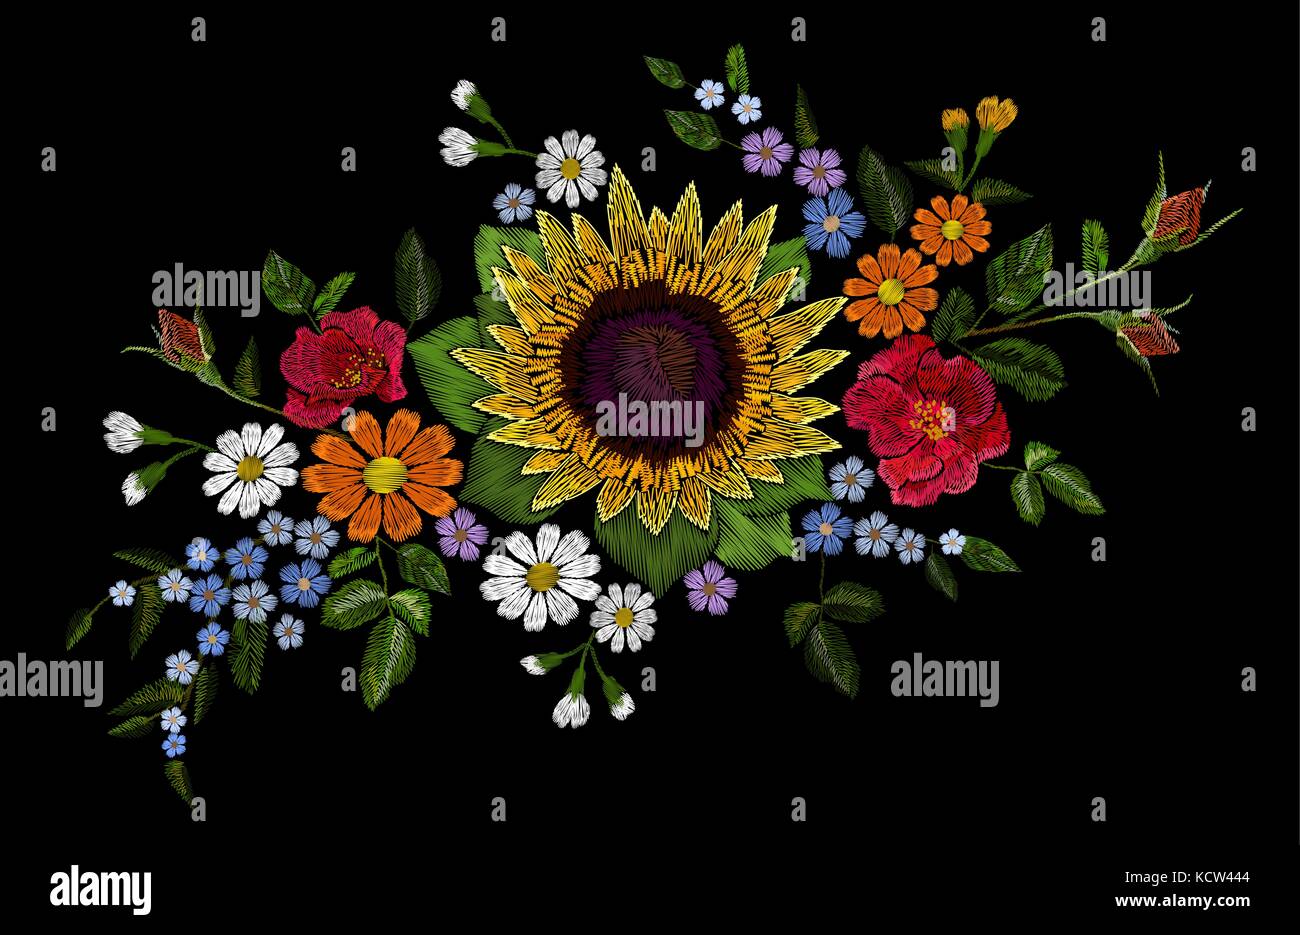 Embroidery flower bouquet sunflower dog rose briar daisy forget-me-not gerbera. Blooming field plant arrangement. Fashion patch stitch textile print on black background vector illustration Stock Vector